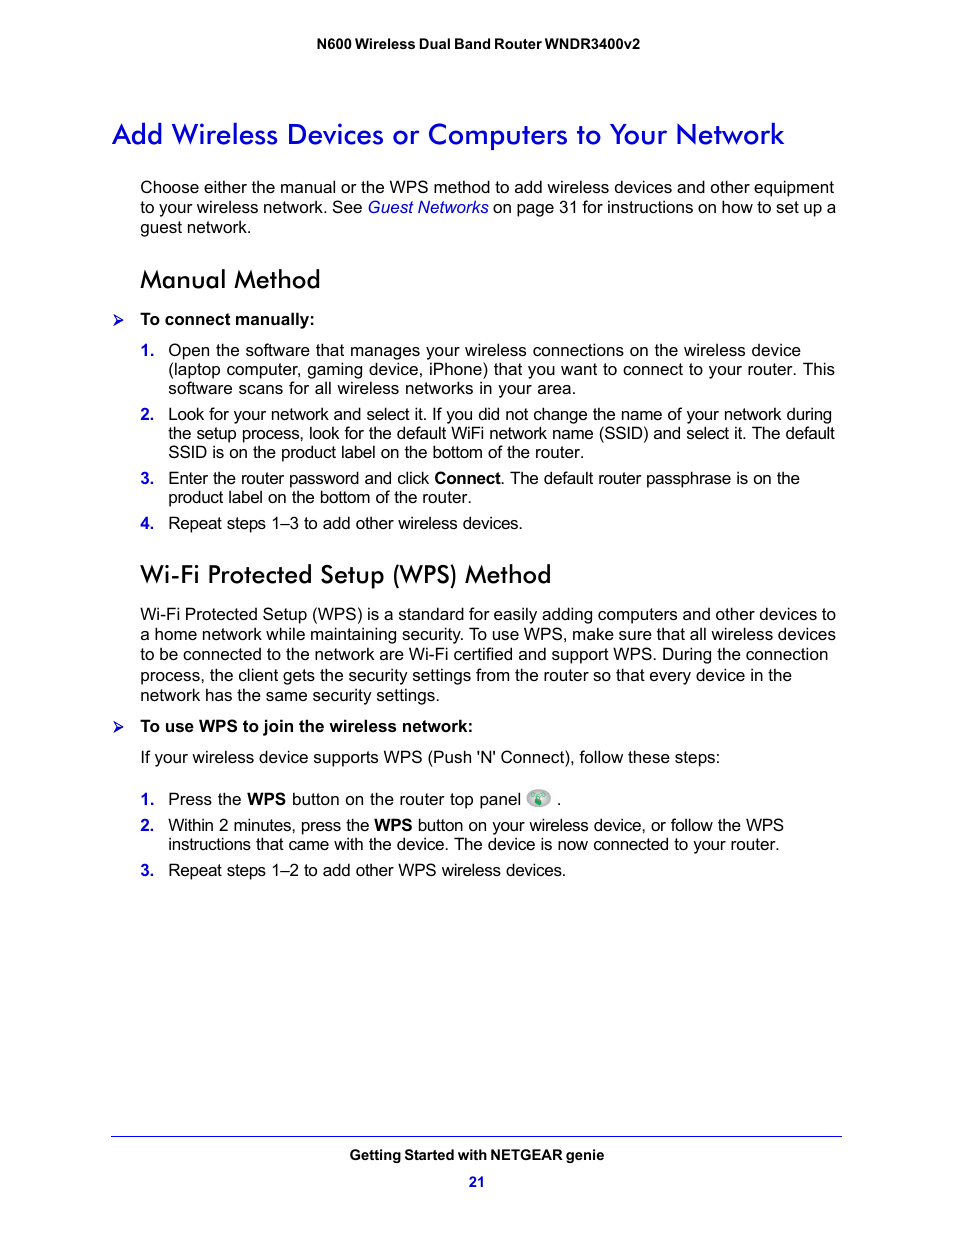 Add wireless devices or computers to your network, Manual method, Wi-fi  protected setup (wps) method | NETGEAR N600 Wireless Dual Band Router  WNDR3400v2 User Manual | Page 21 / 120 | Original mode